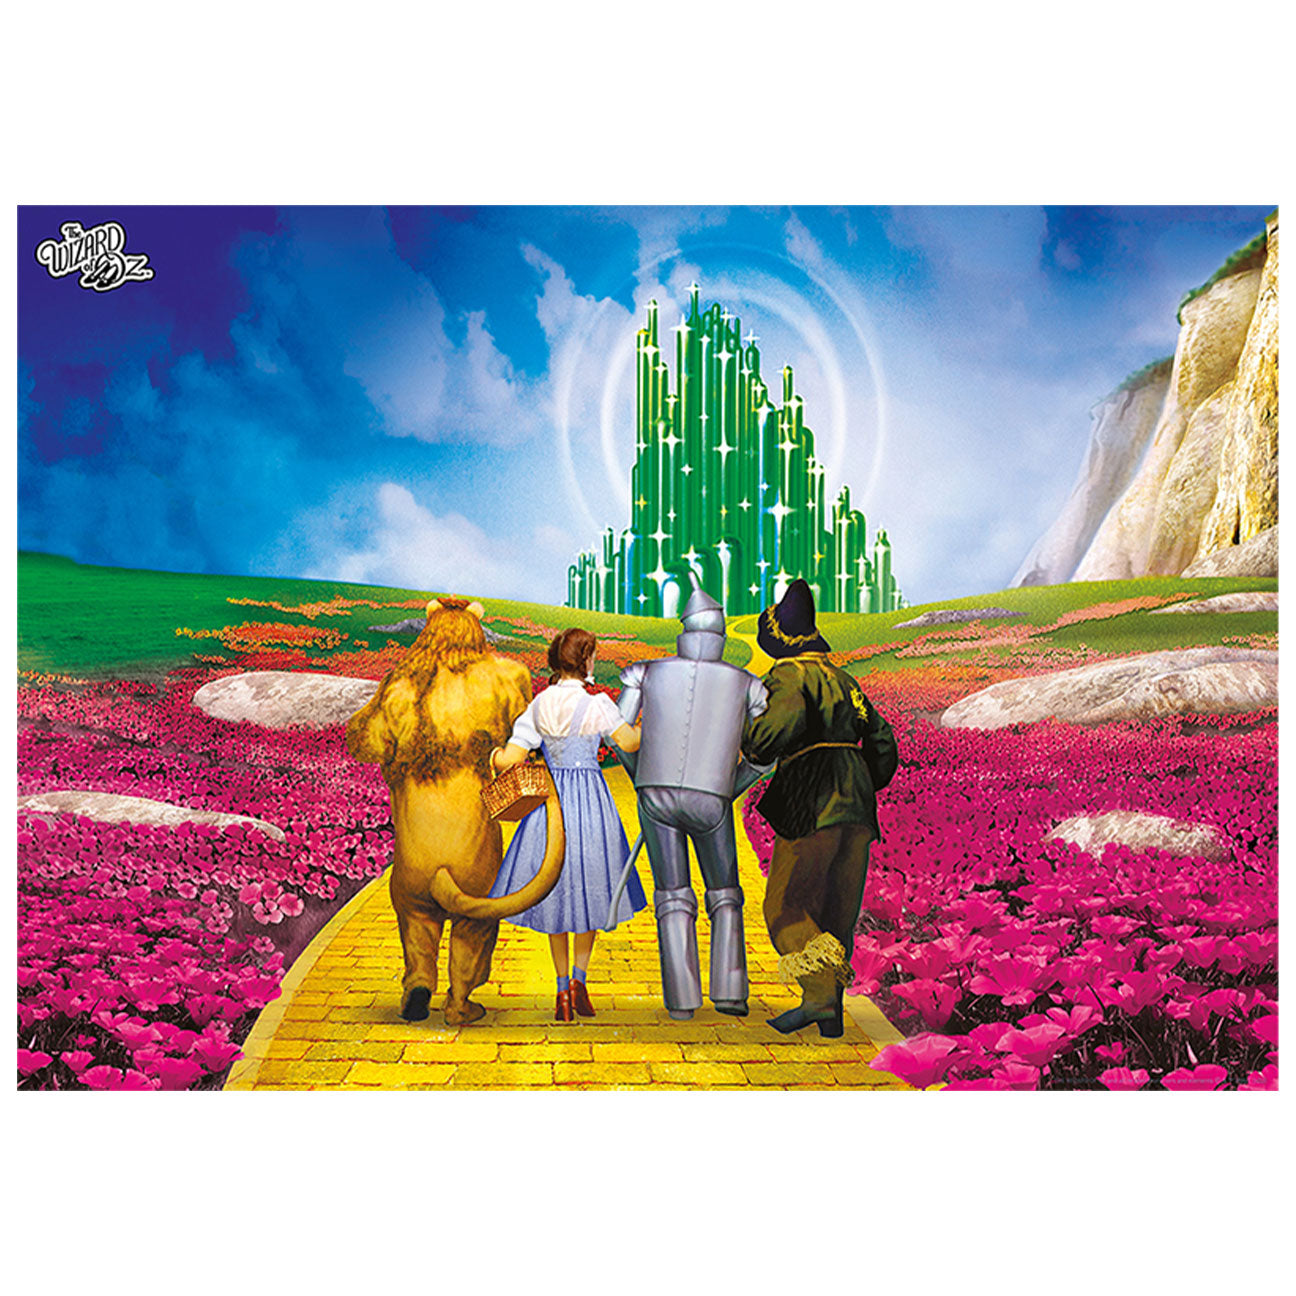 The Wizard of Oz Limited Edition Art Print